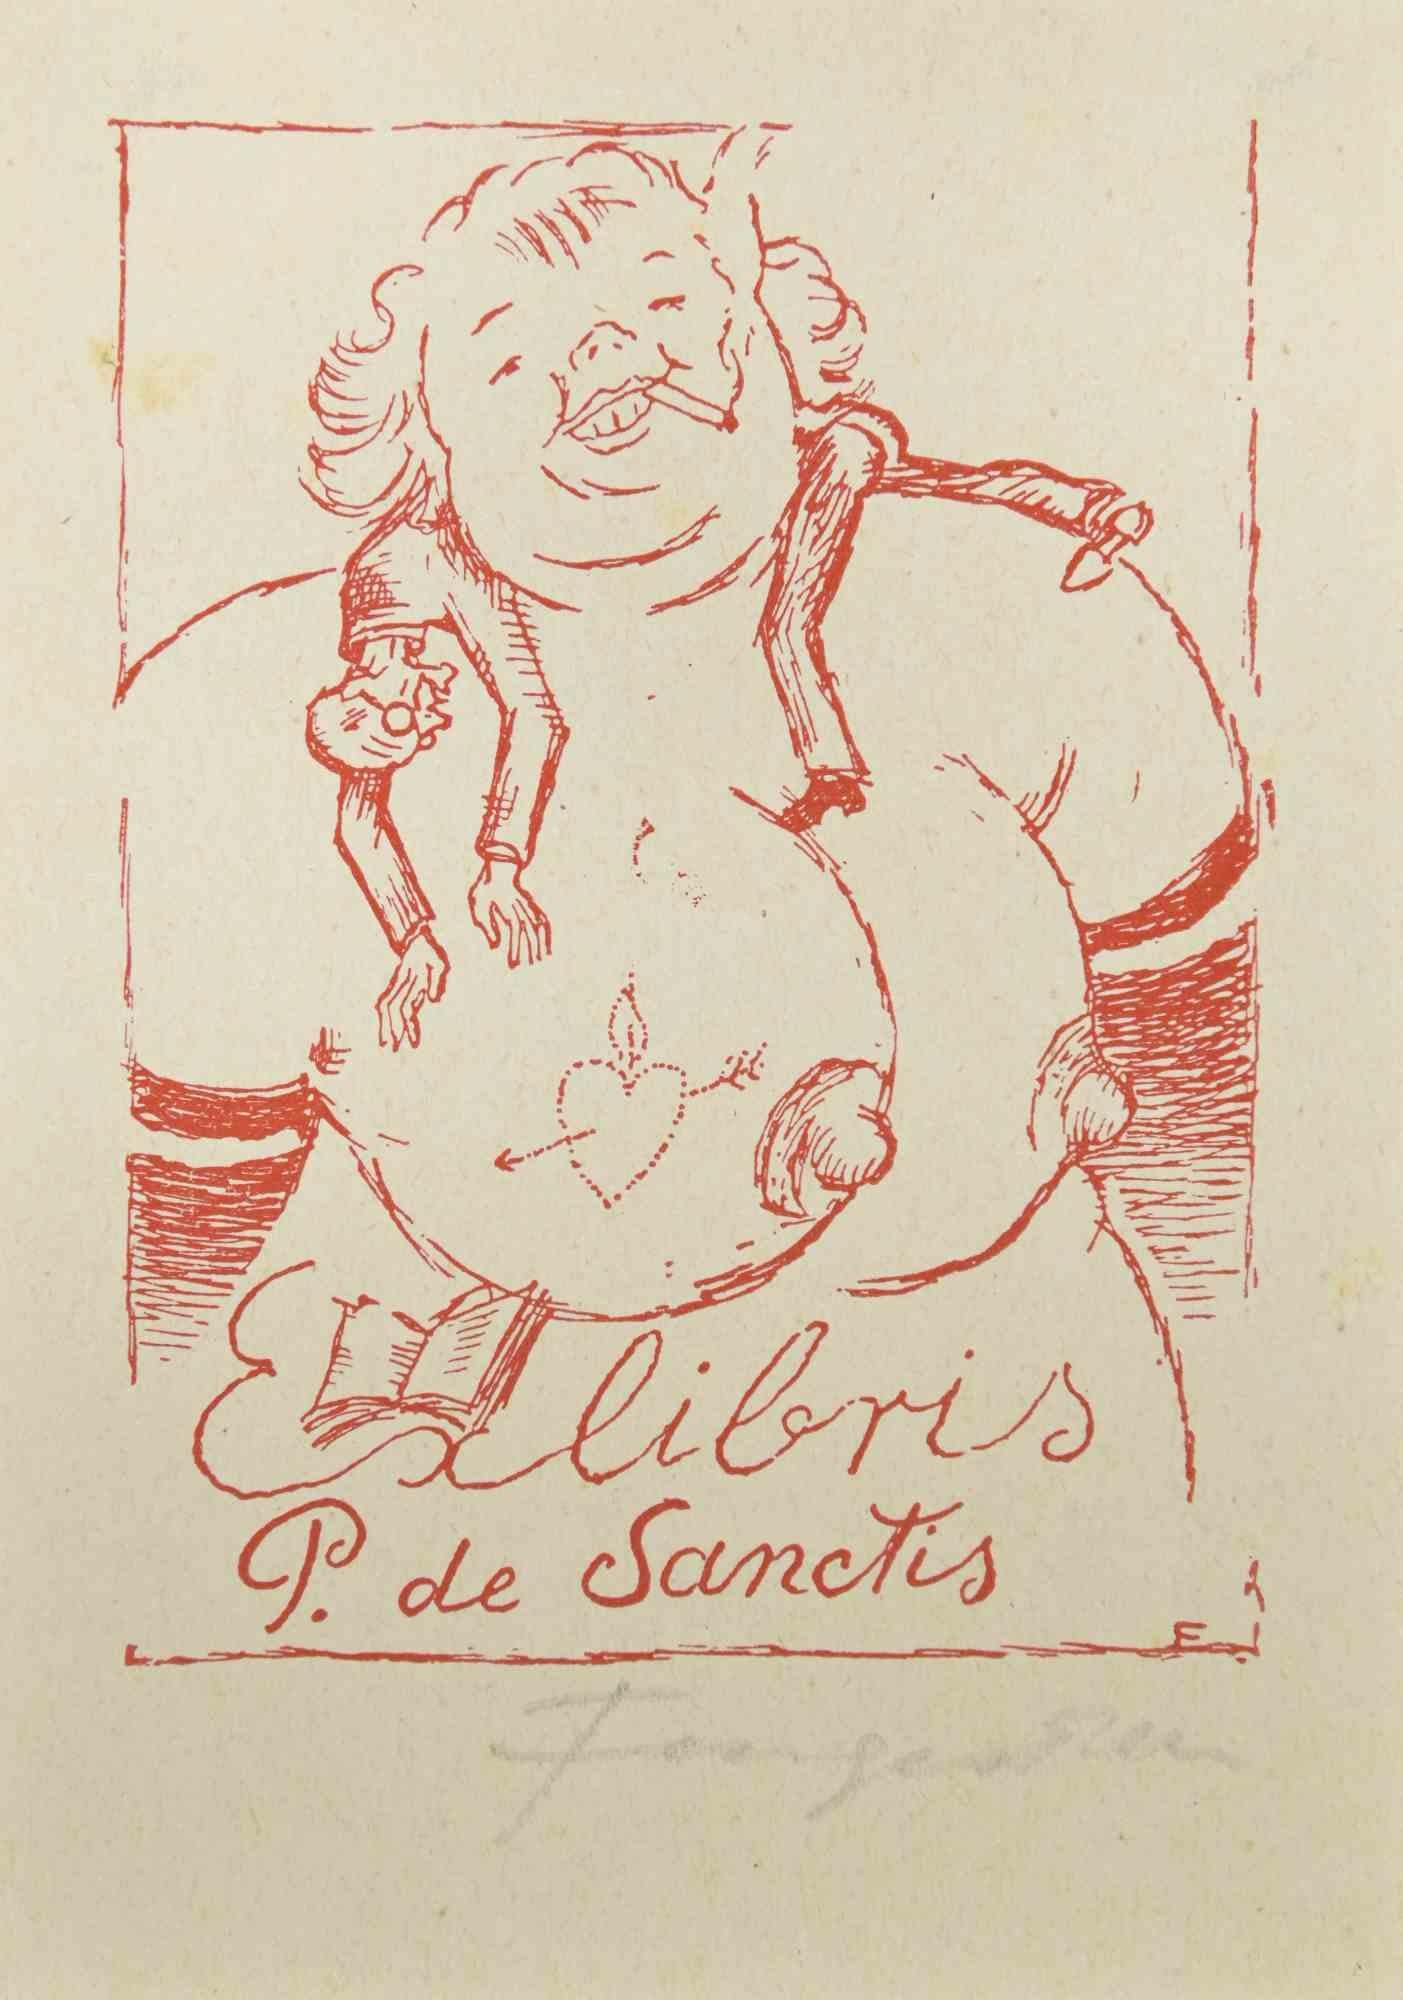 Ex Libris P. de Sanctis  is a colored woodcut print created by  Michel Fingesten.

Hand Signed on the lower right margin.

Good conditions.

Michel Fingesten (1884 - 1943) was a Czech painter and engraver of Jewish origin. He is considered one of